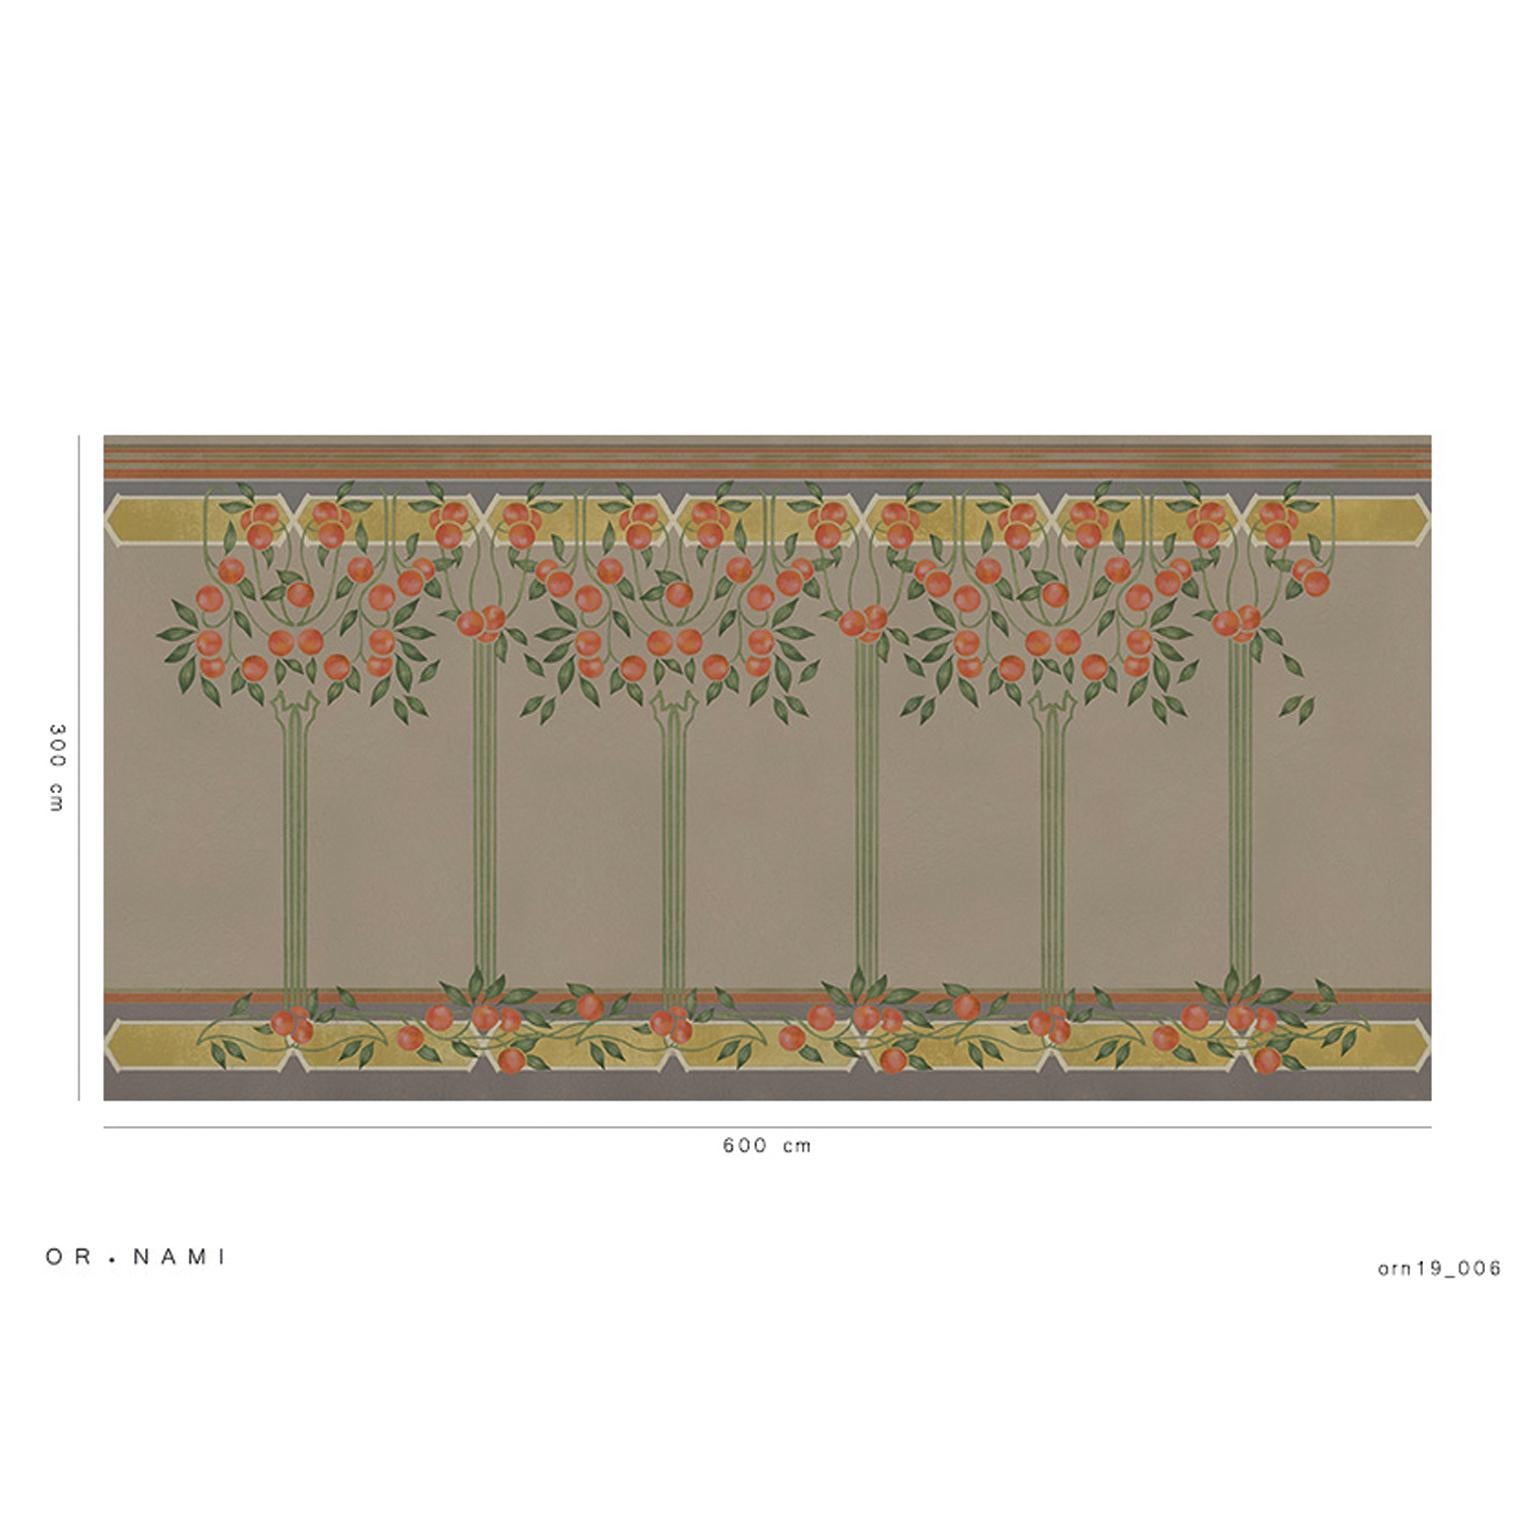 Contemporary Ornami Art Nouveau Summer Vinyl Wallpaper Made in Italy Digital Printing For Sale